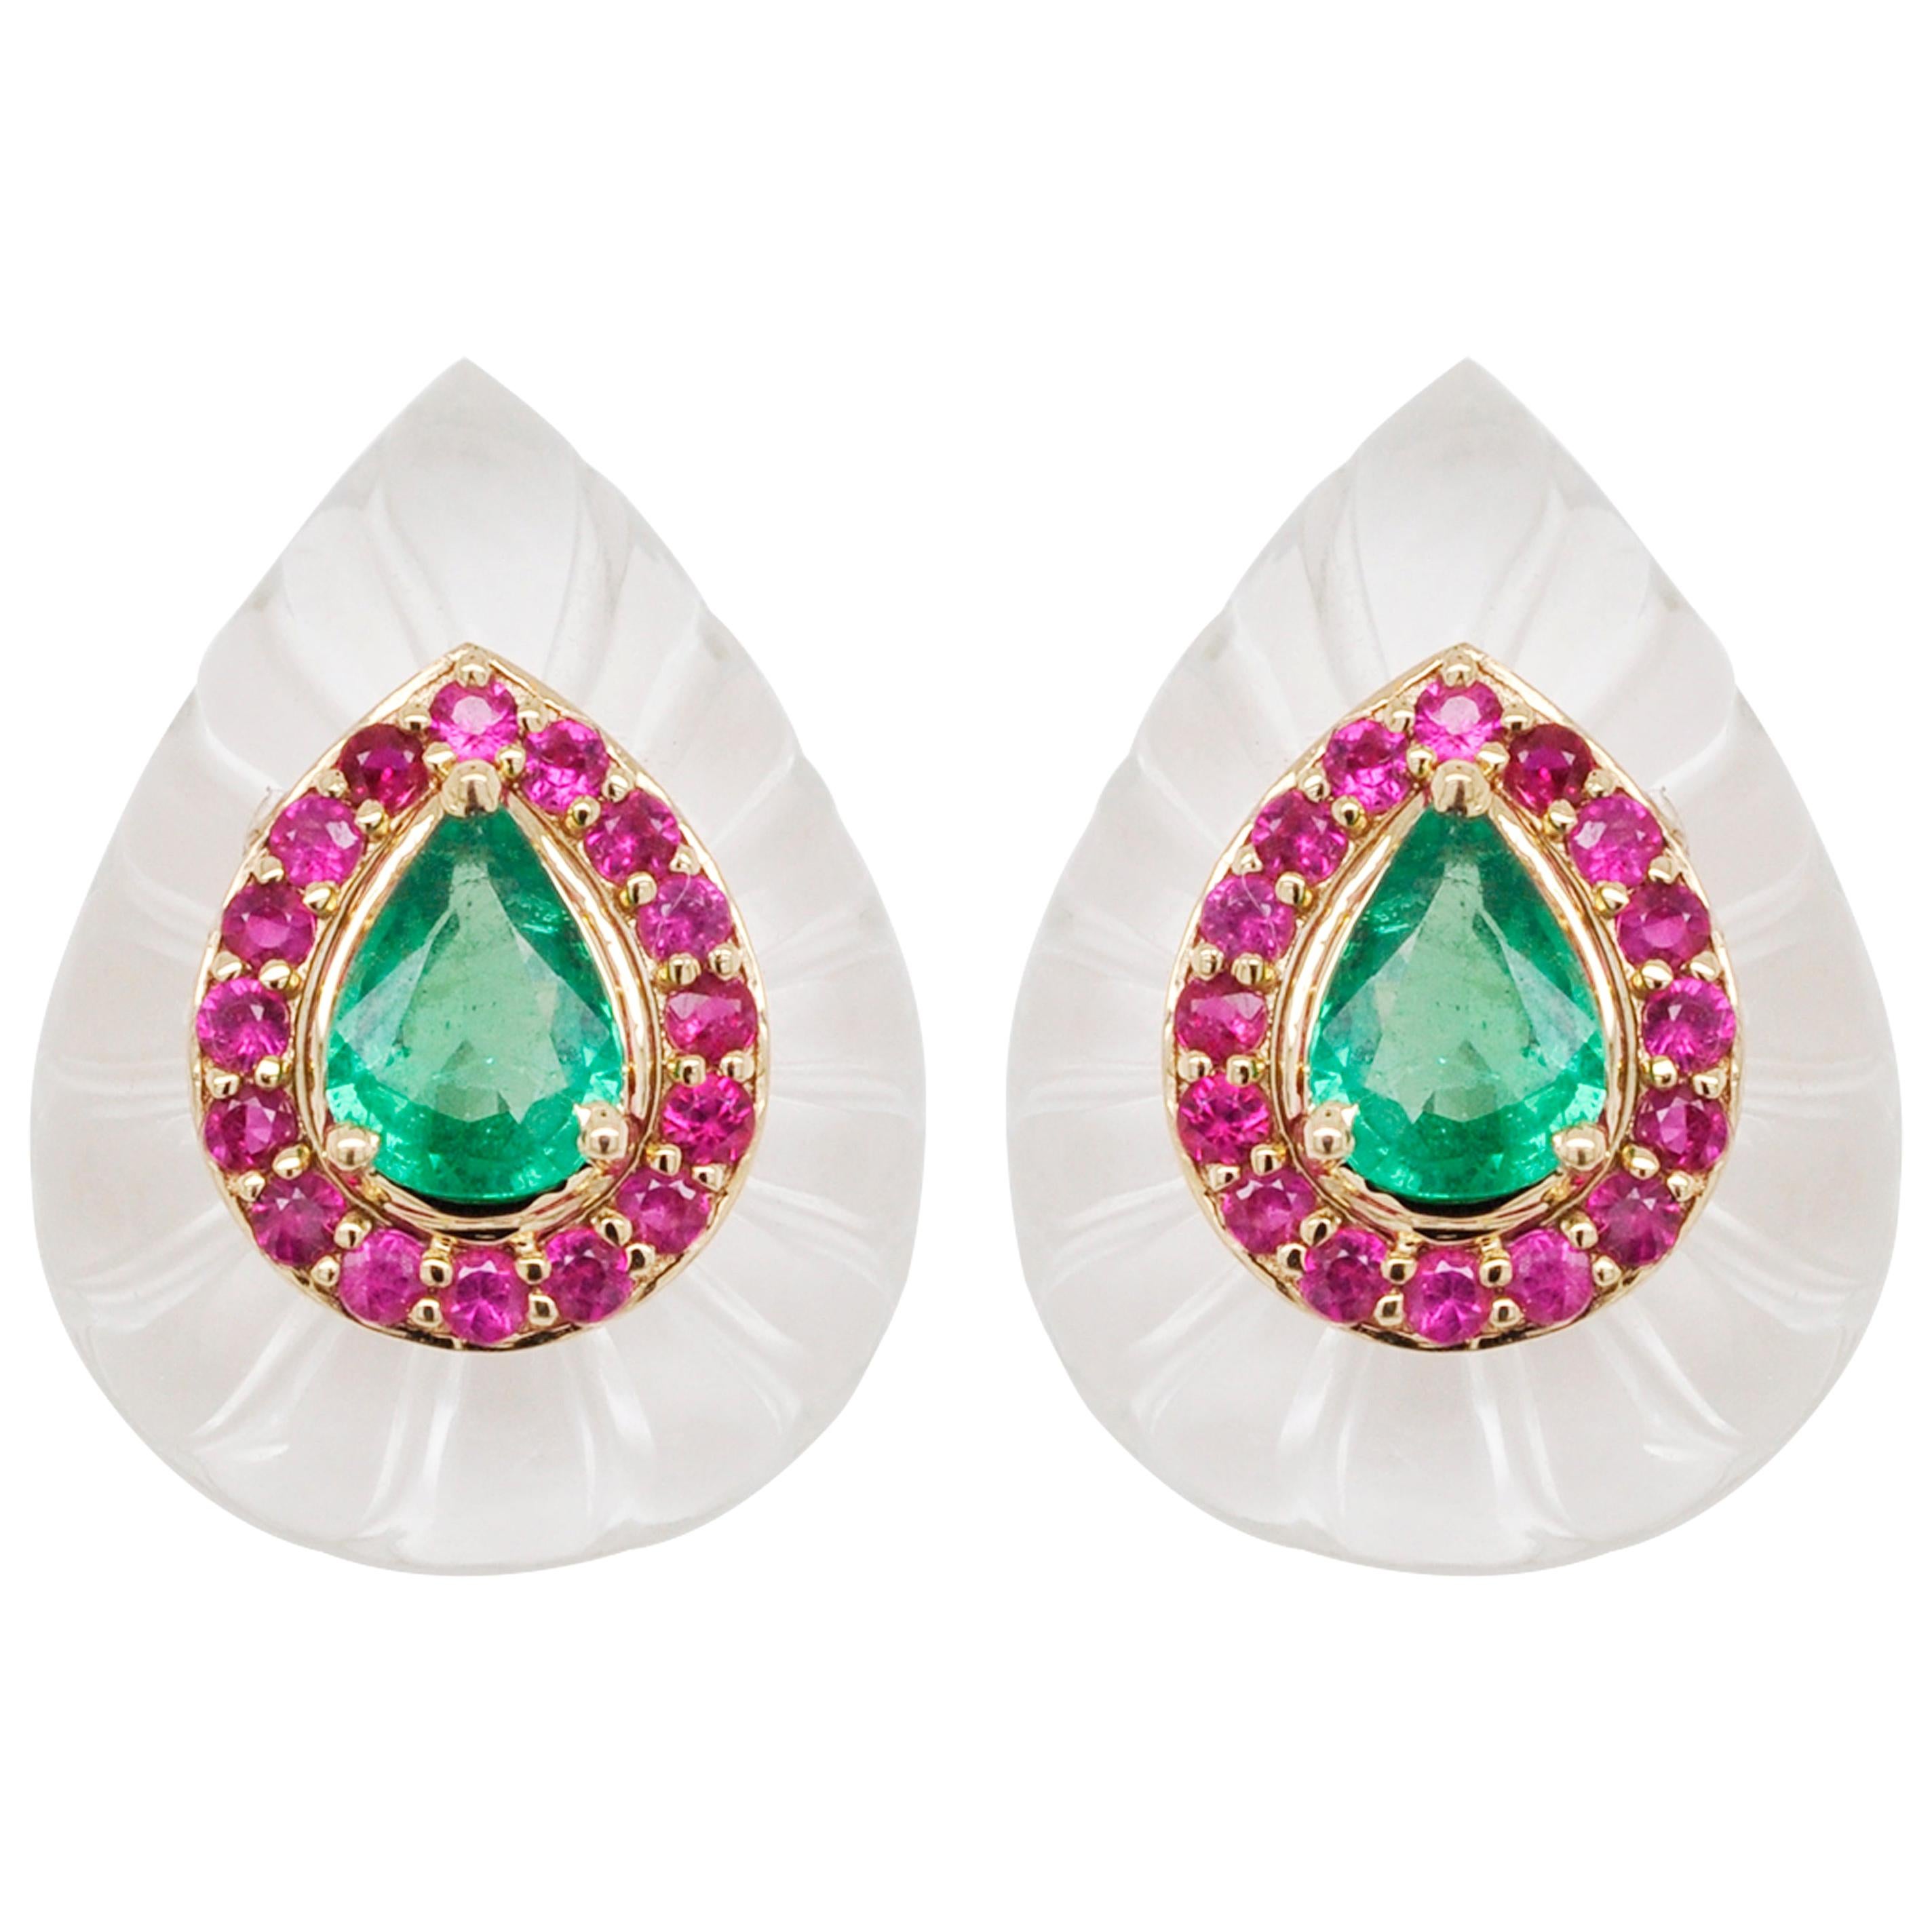 Inspired by the mughal era, presenting 18 karat yellow gold white quartz crystal carving pear emerald ruby stud earrings. 
Pear shaped crystal carving with evenly spaced grooves is the hero in these studs. To accentuate its beauty, an array of round